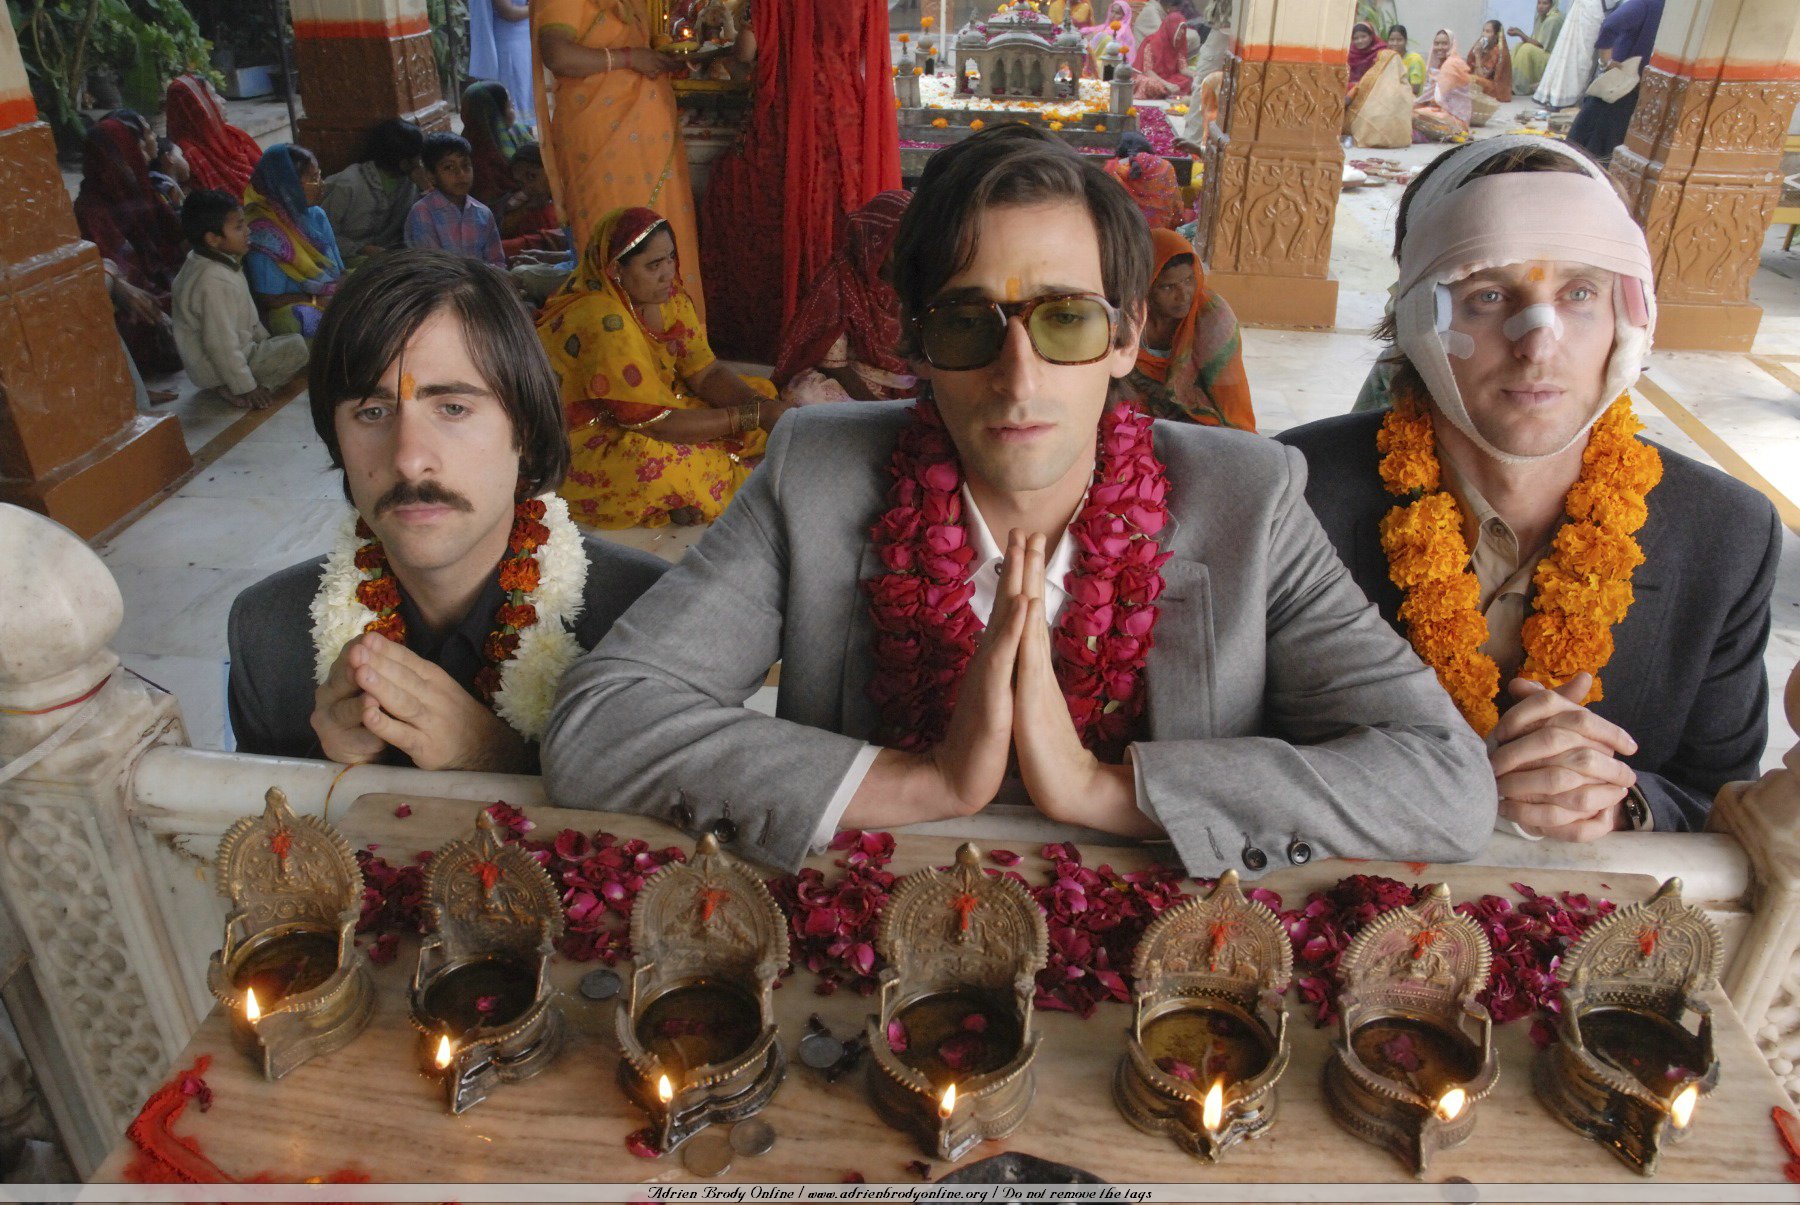 In The Darjeeling Limited, Peter has an headache because he's